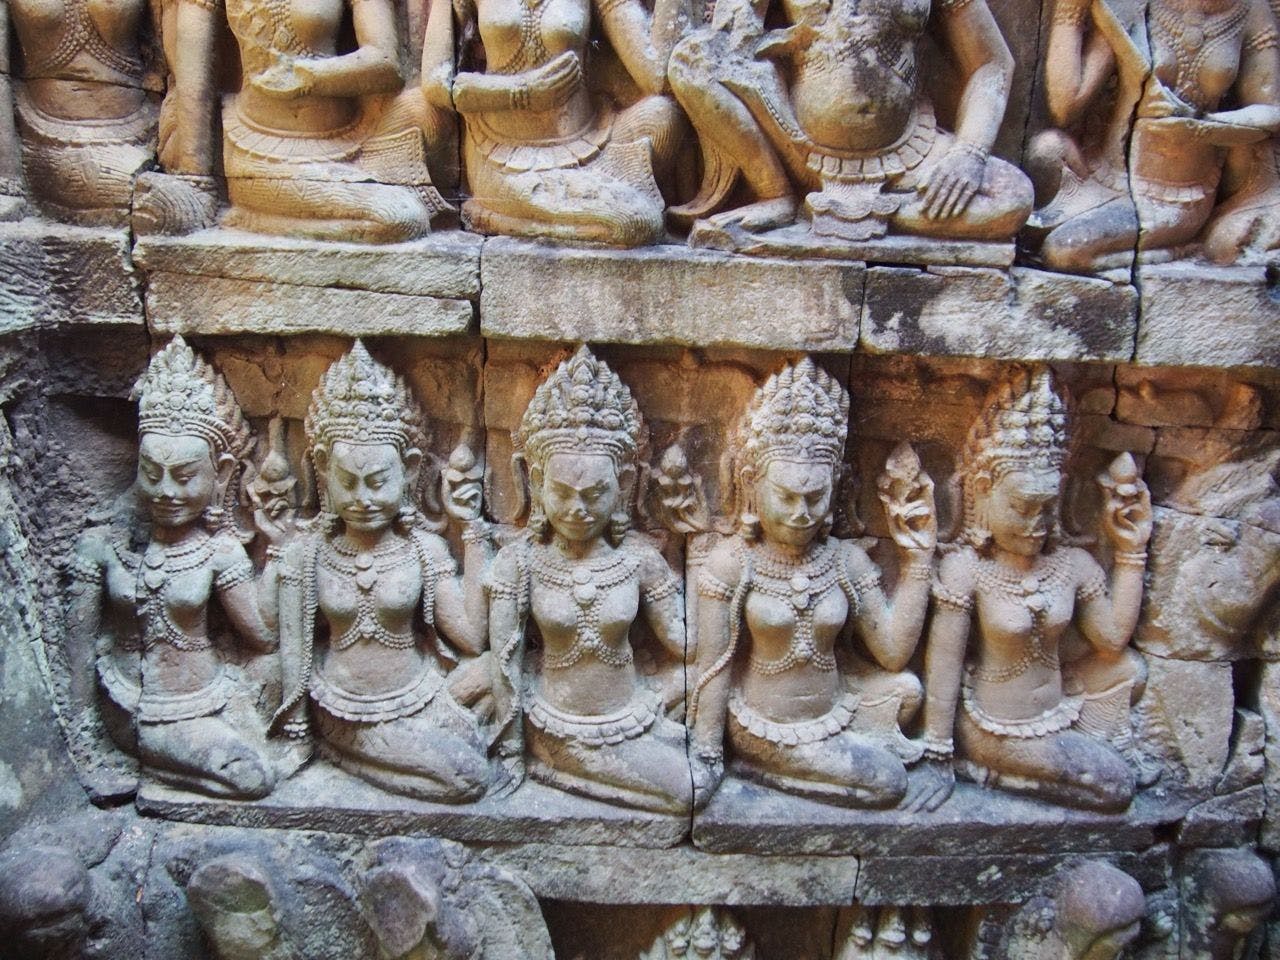 Apsara dancers carved on the wall of temple in Cambodia.